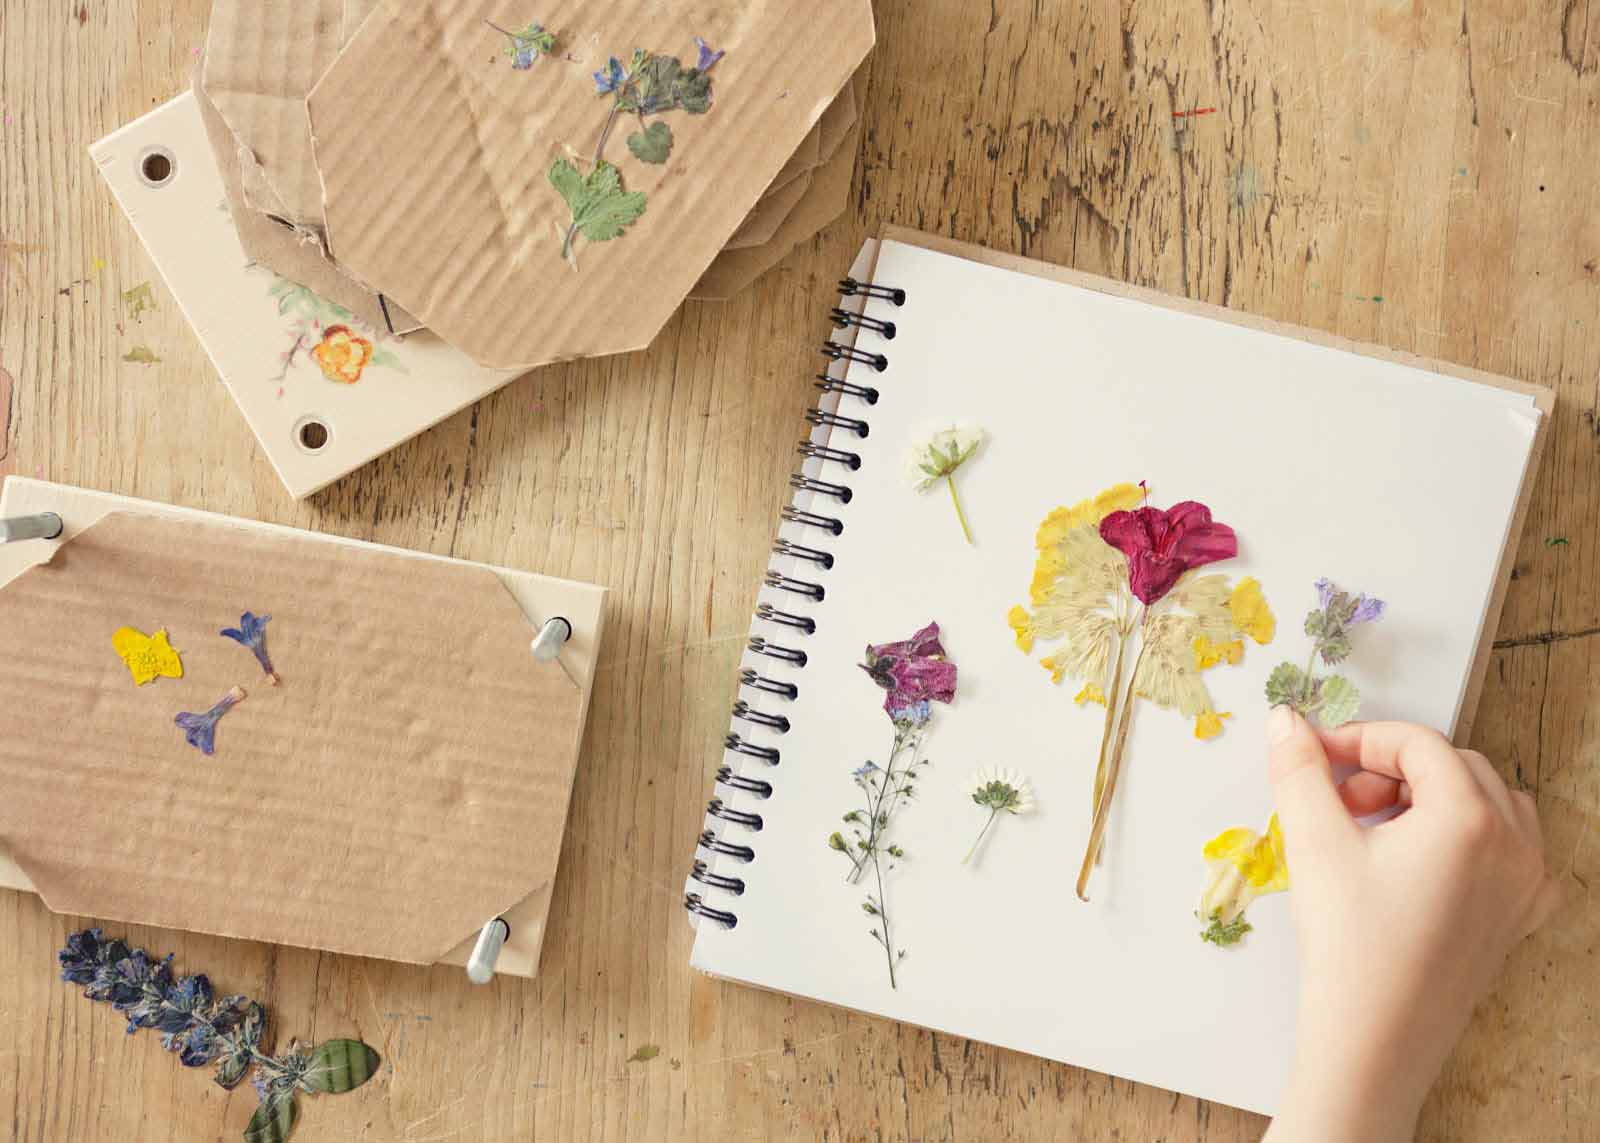 Child creating a book of flower pressings on a desk at home.